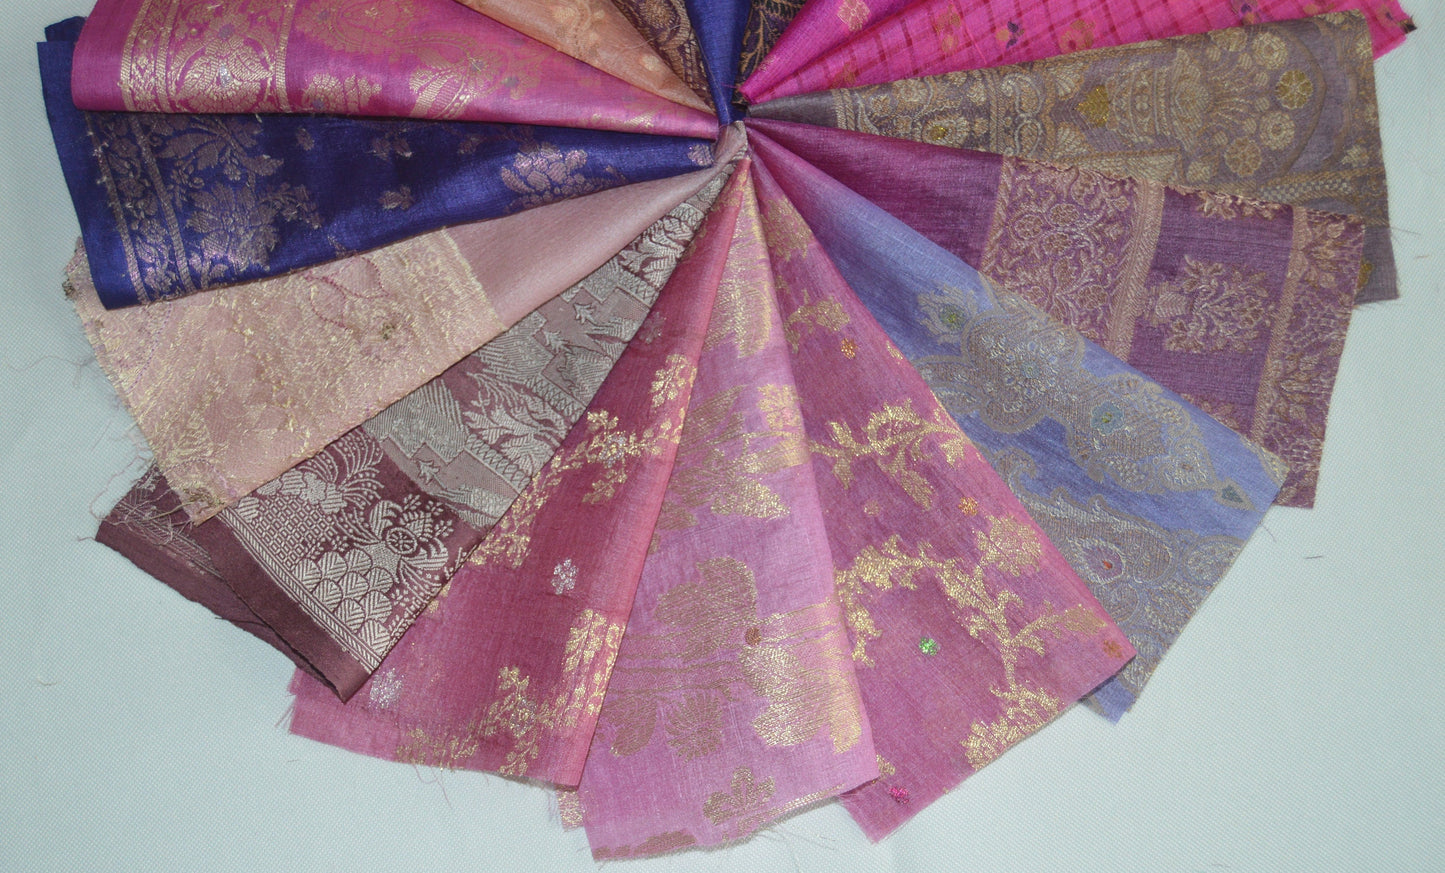 5 Inch x 16 Pieces Pink Purple Recycled Vintage Sari Scraps Craft Fabric Card Making Collage Mixed Media Textile Art Junk Journals